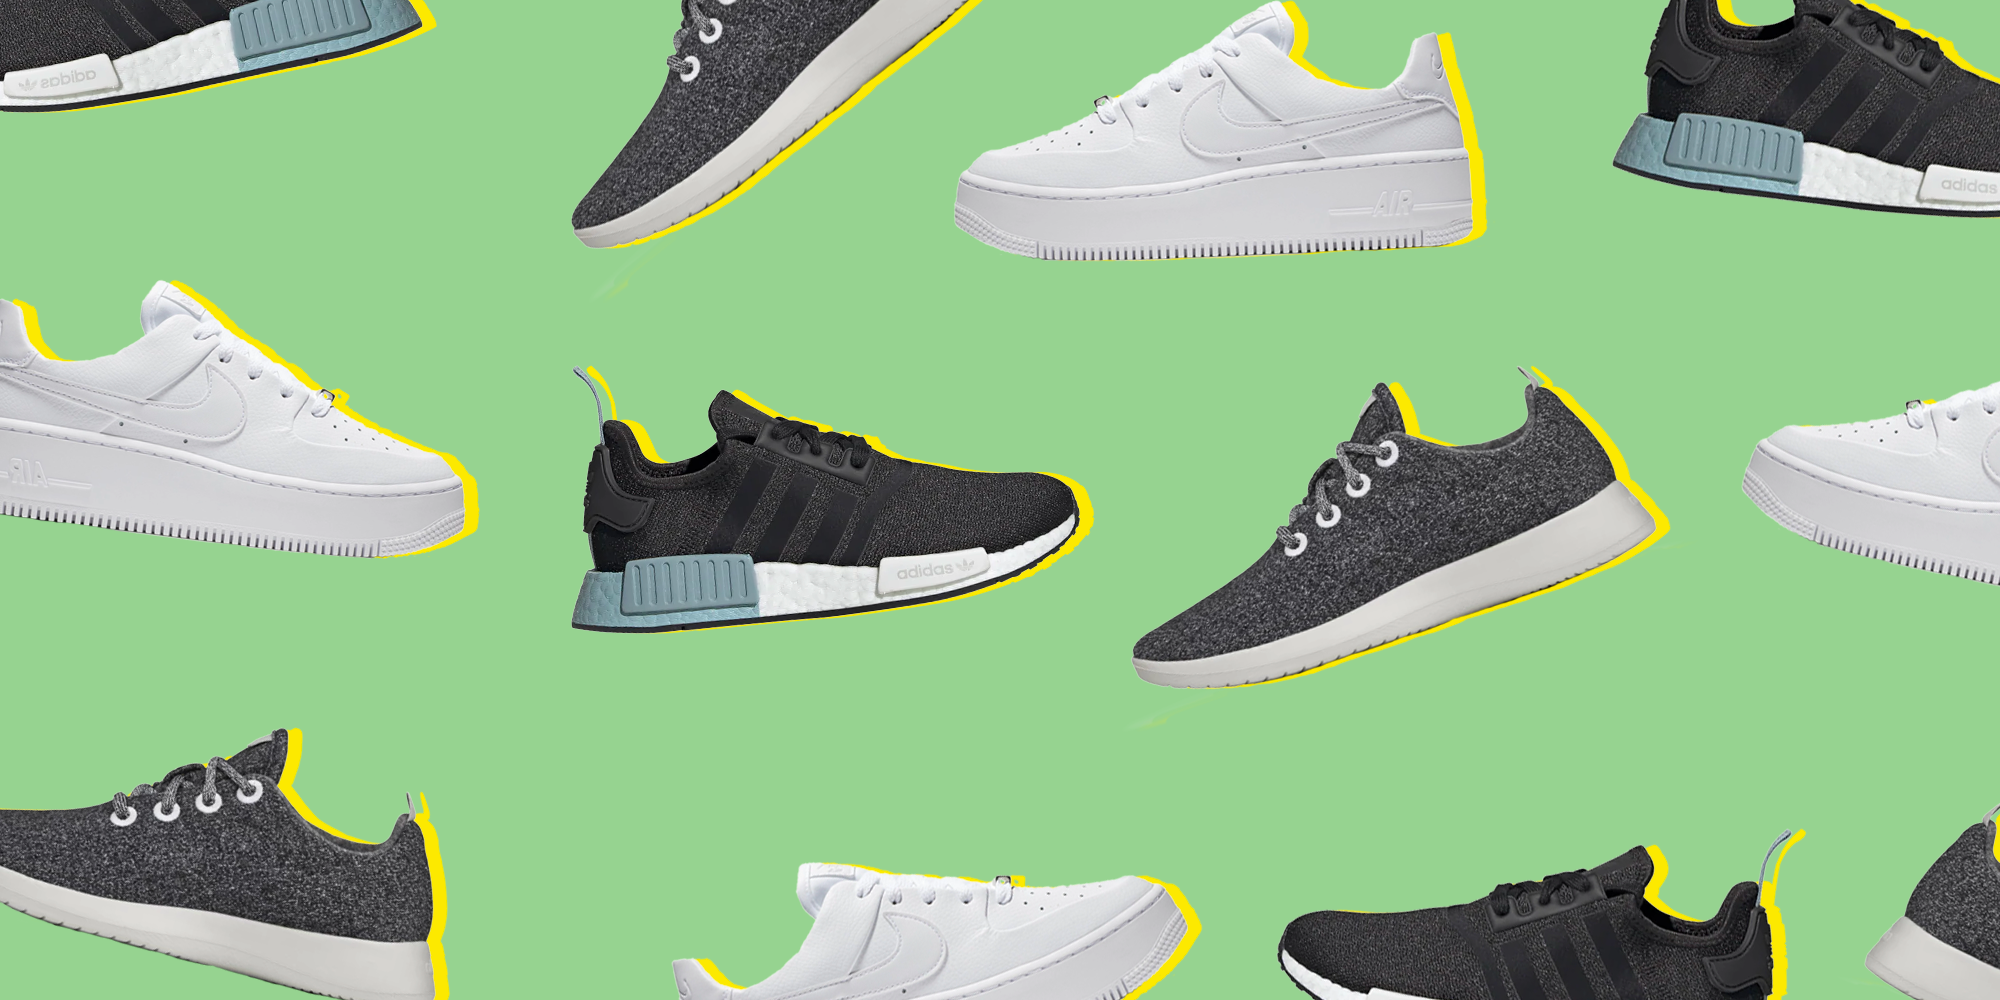 most comfortable sneakers 2019